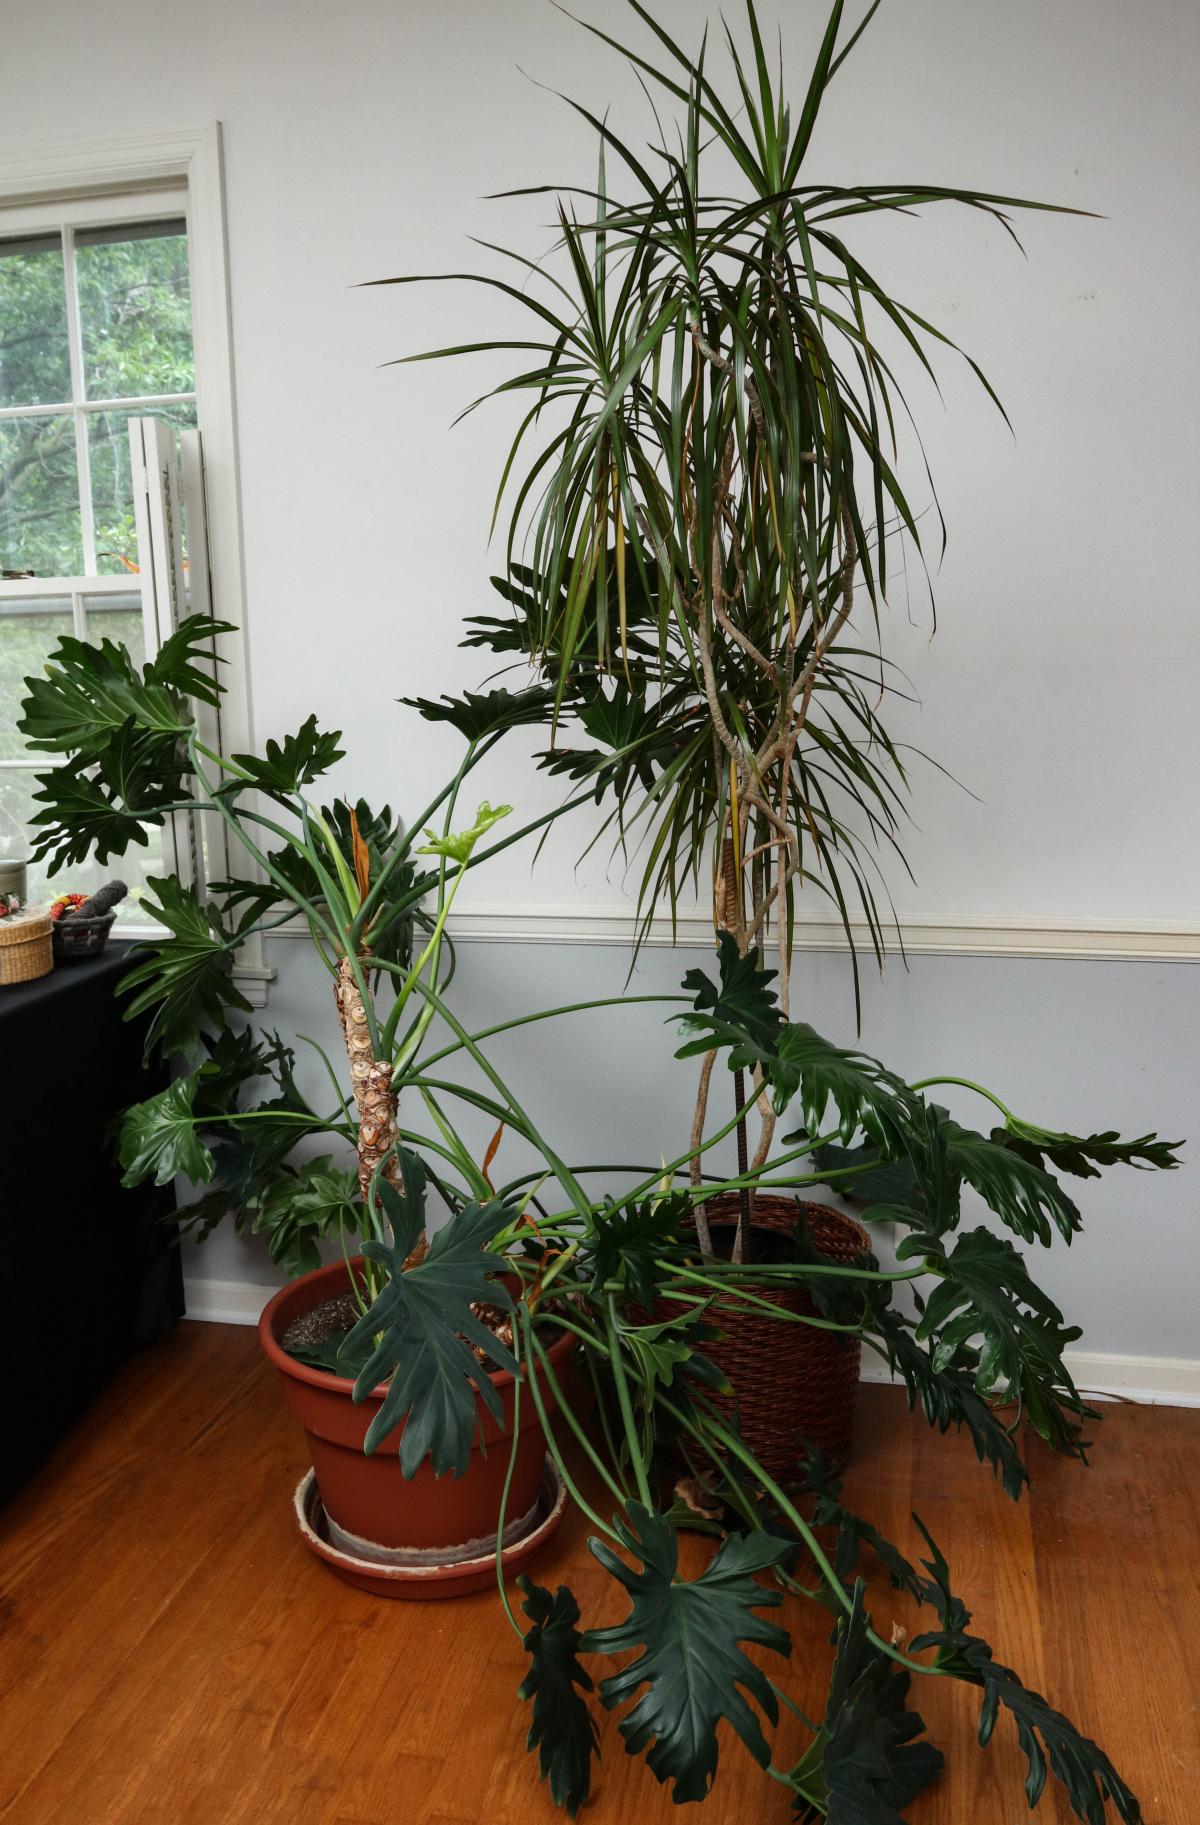 LARGE HOUSE PLANTS, PHILODENDRON AND YUCCA TREES